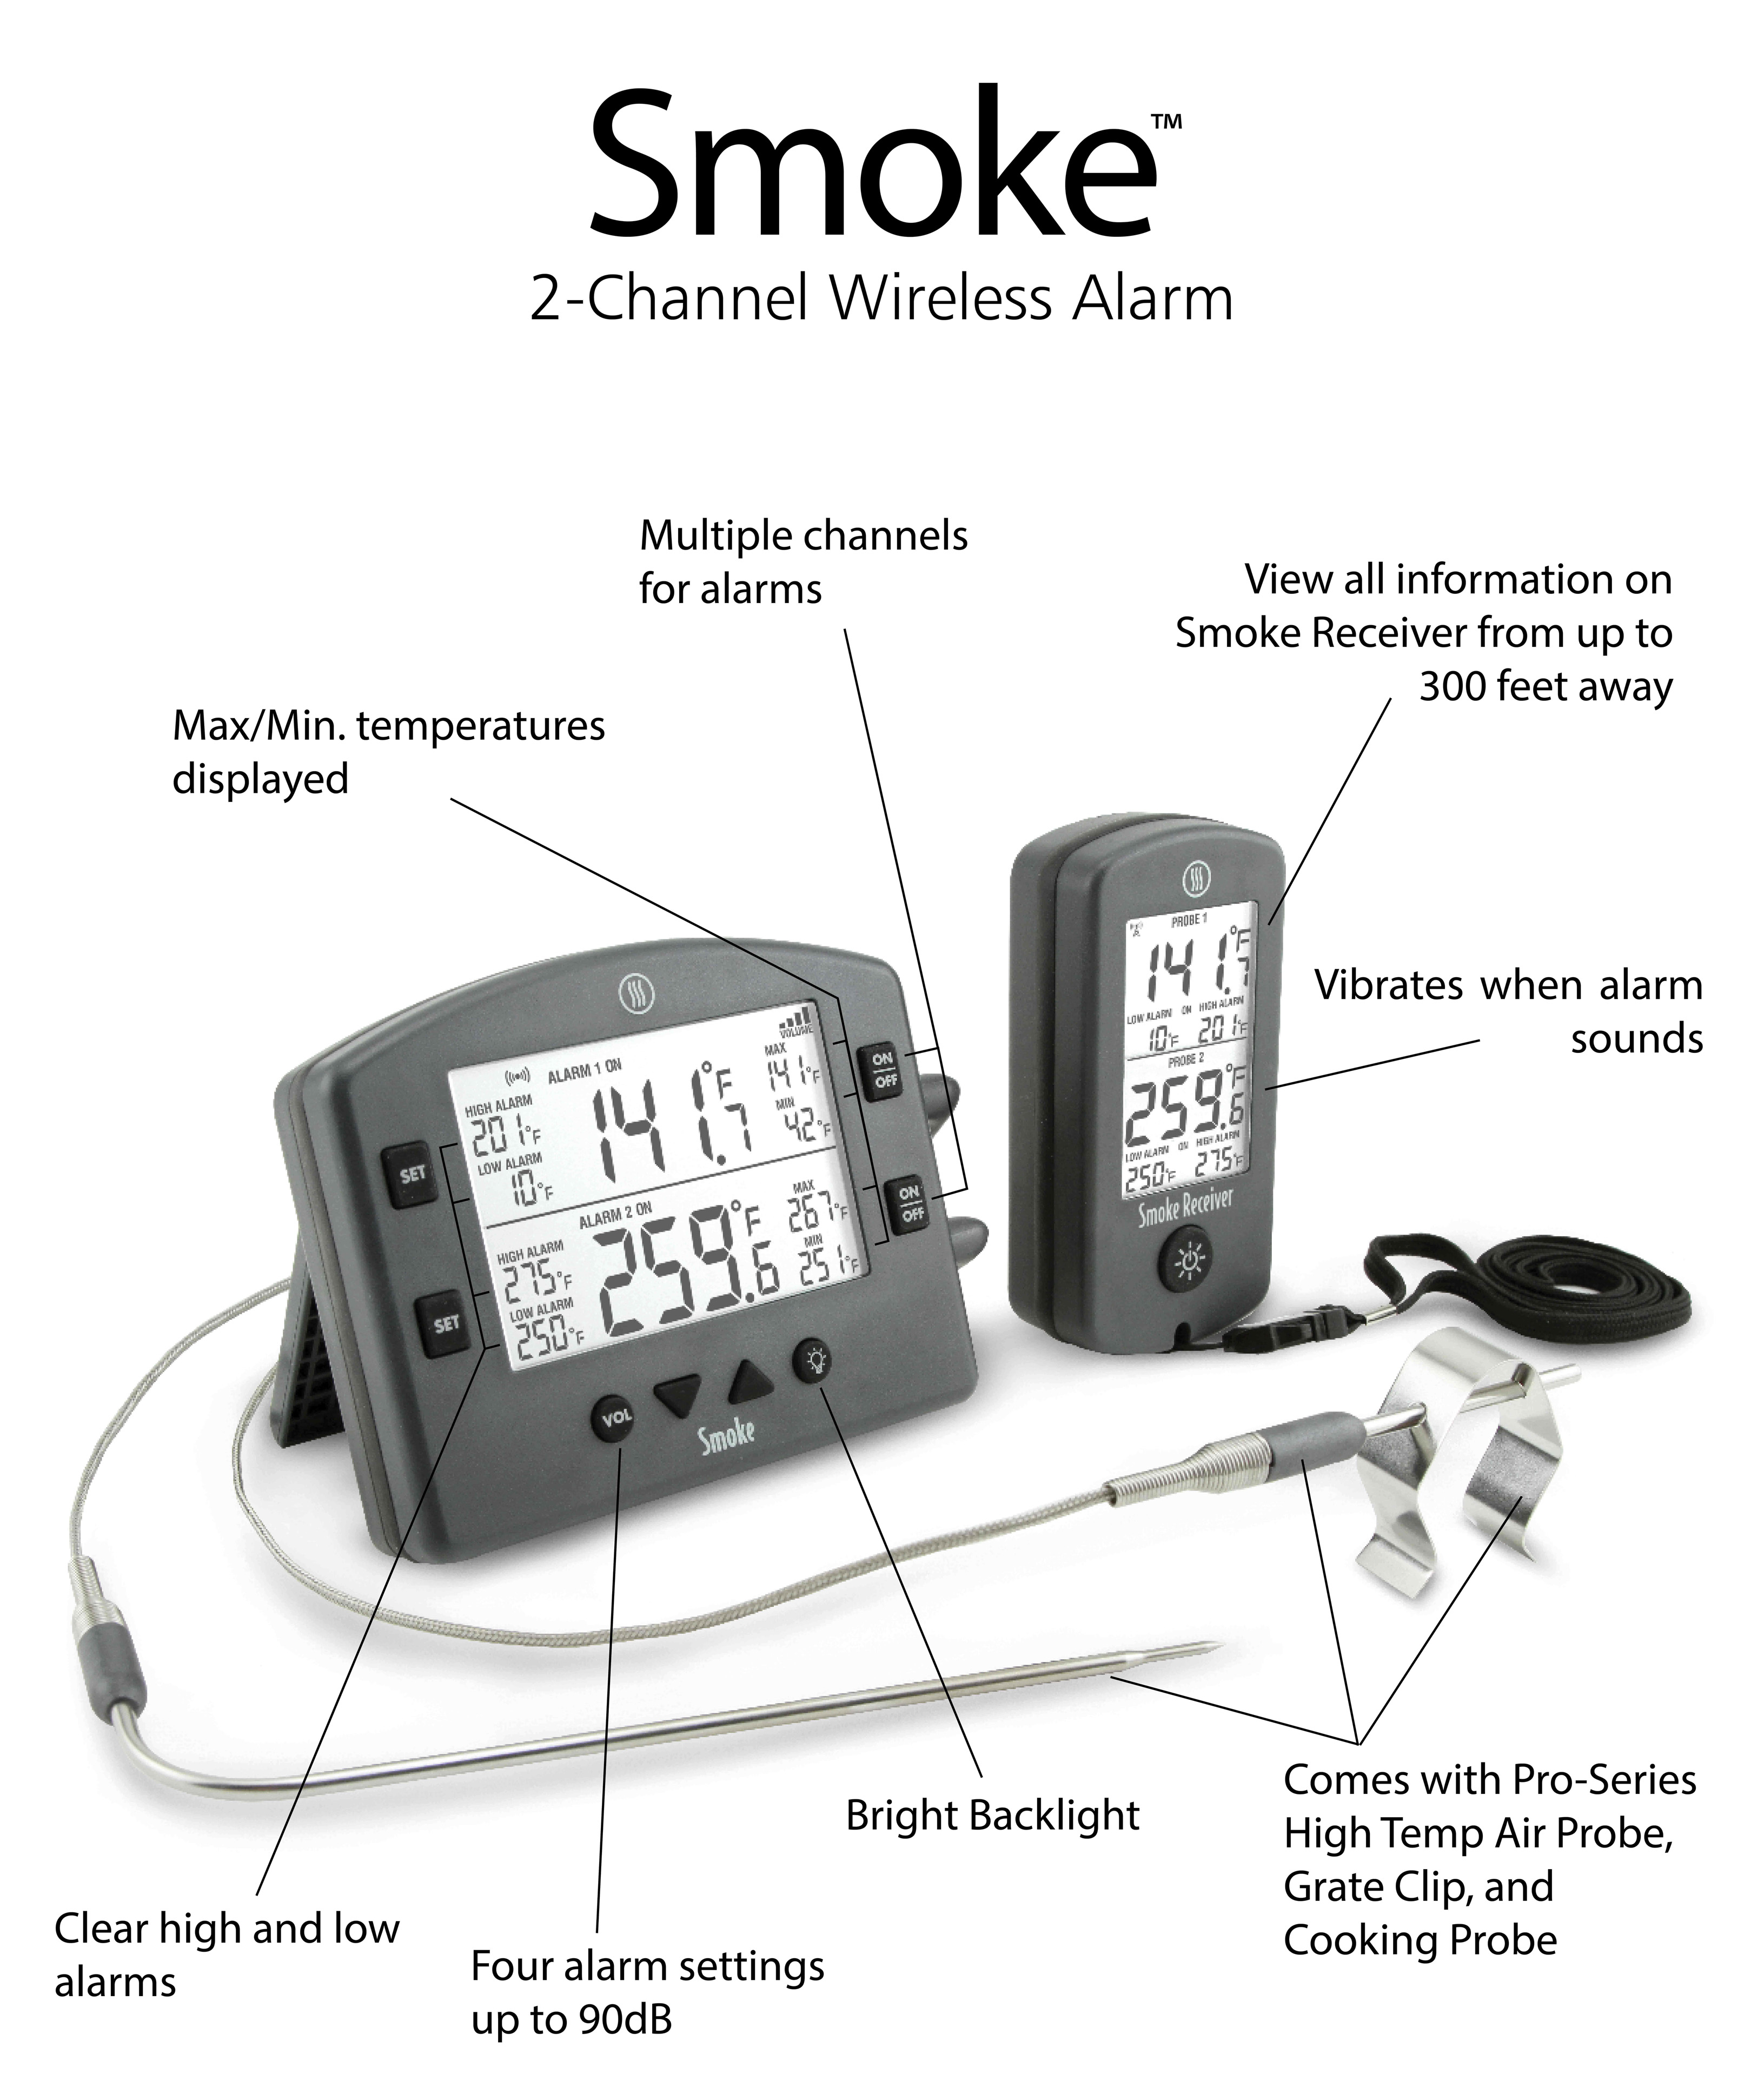 Smoke 2-Channel Wireless Alarm Multiple channels for alarms View all information on Smoke Receiver from up to 300 feet away MaxMin. temperatures displayed Vibrates when alarm sounds Comes with Pro-Series Bright Backlight High Temp Air Probe, Grate Clip, and Clear high and low . Cooking Probe alarms Four alarm settings up to 90dB 